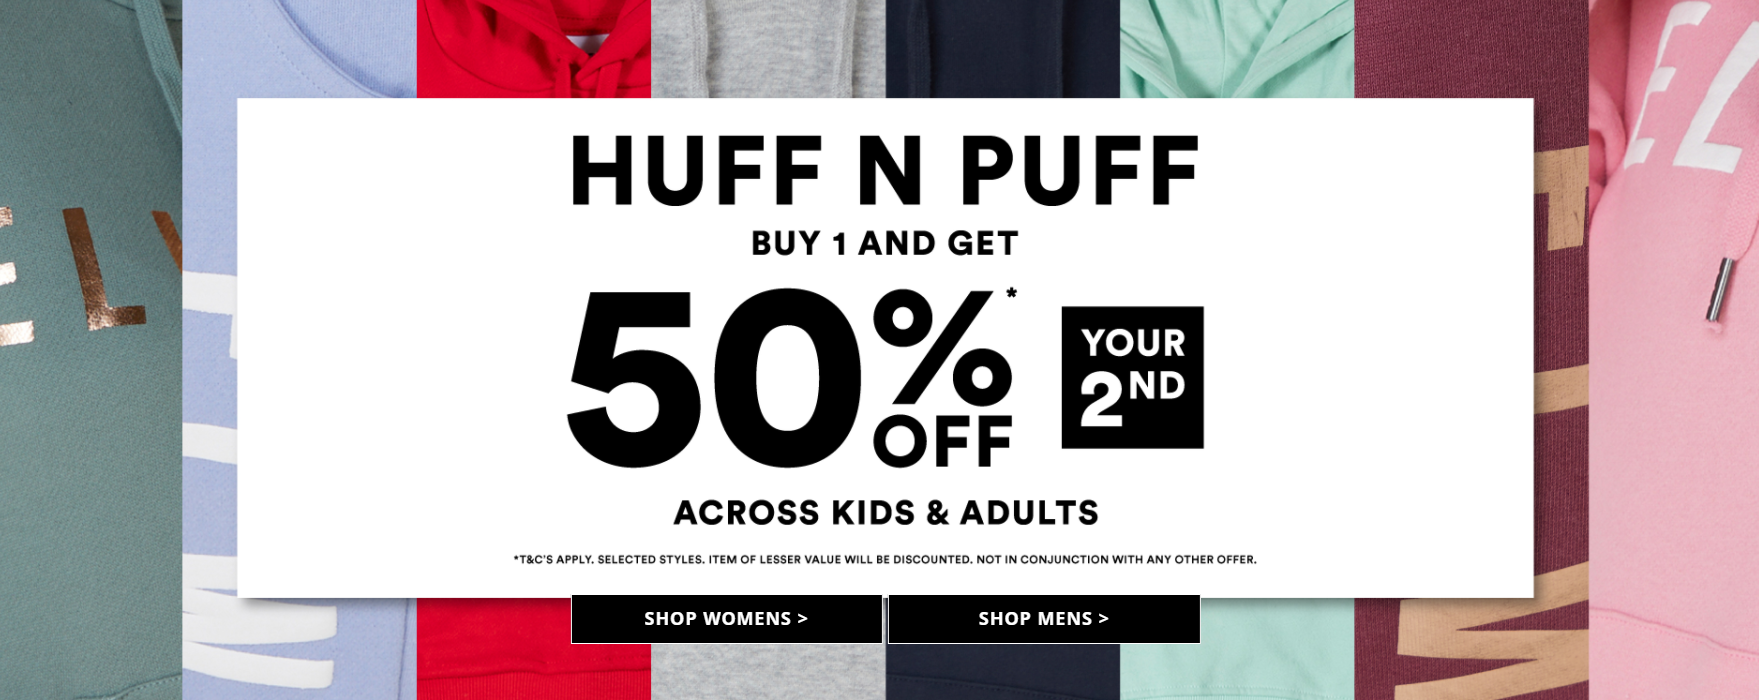 Buy 1 and Get 50% OFF on kids & adults styles at Elwood